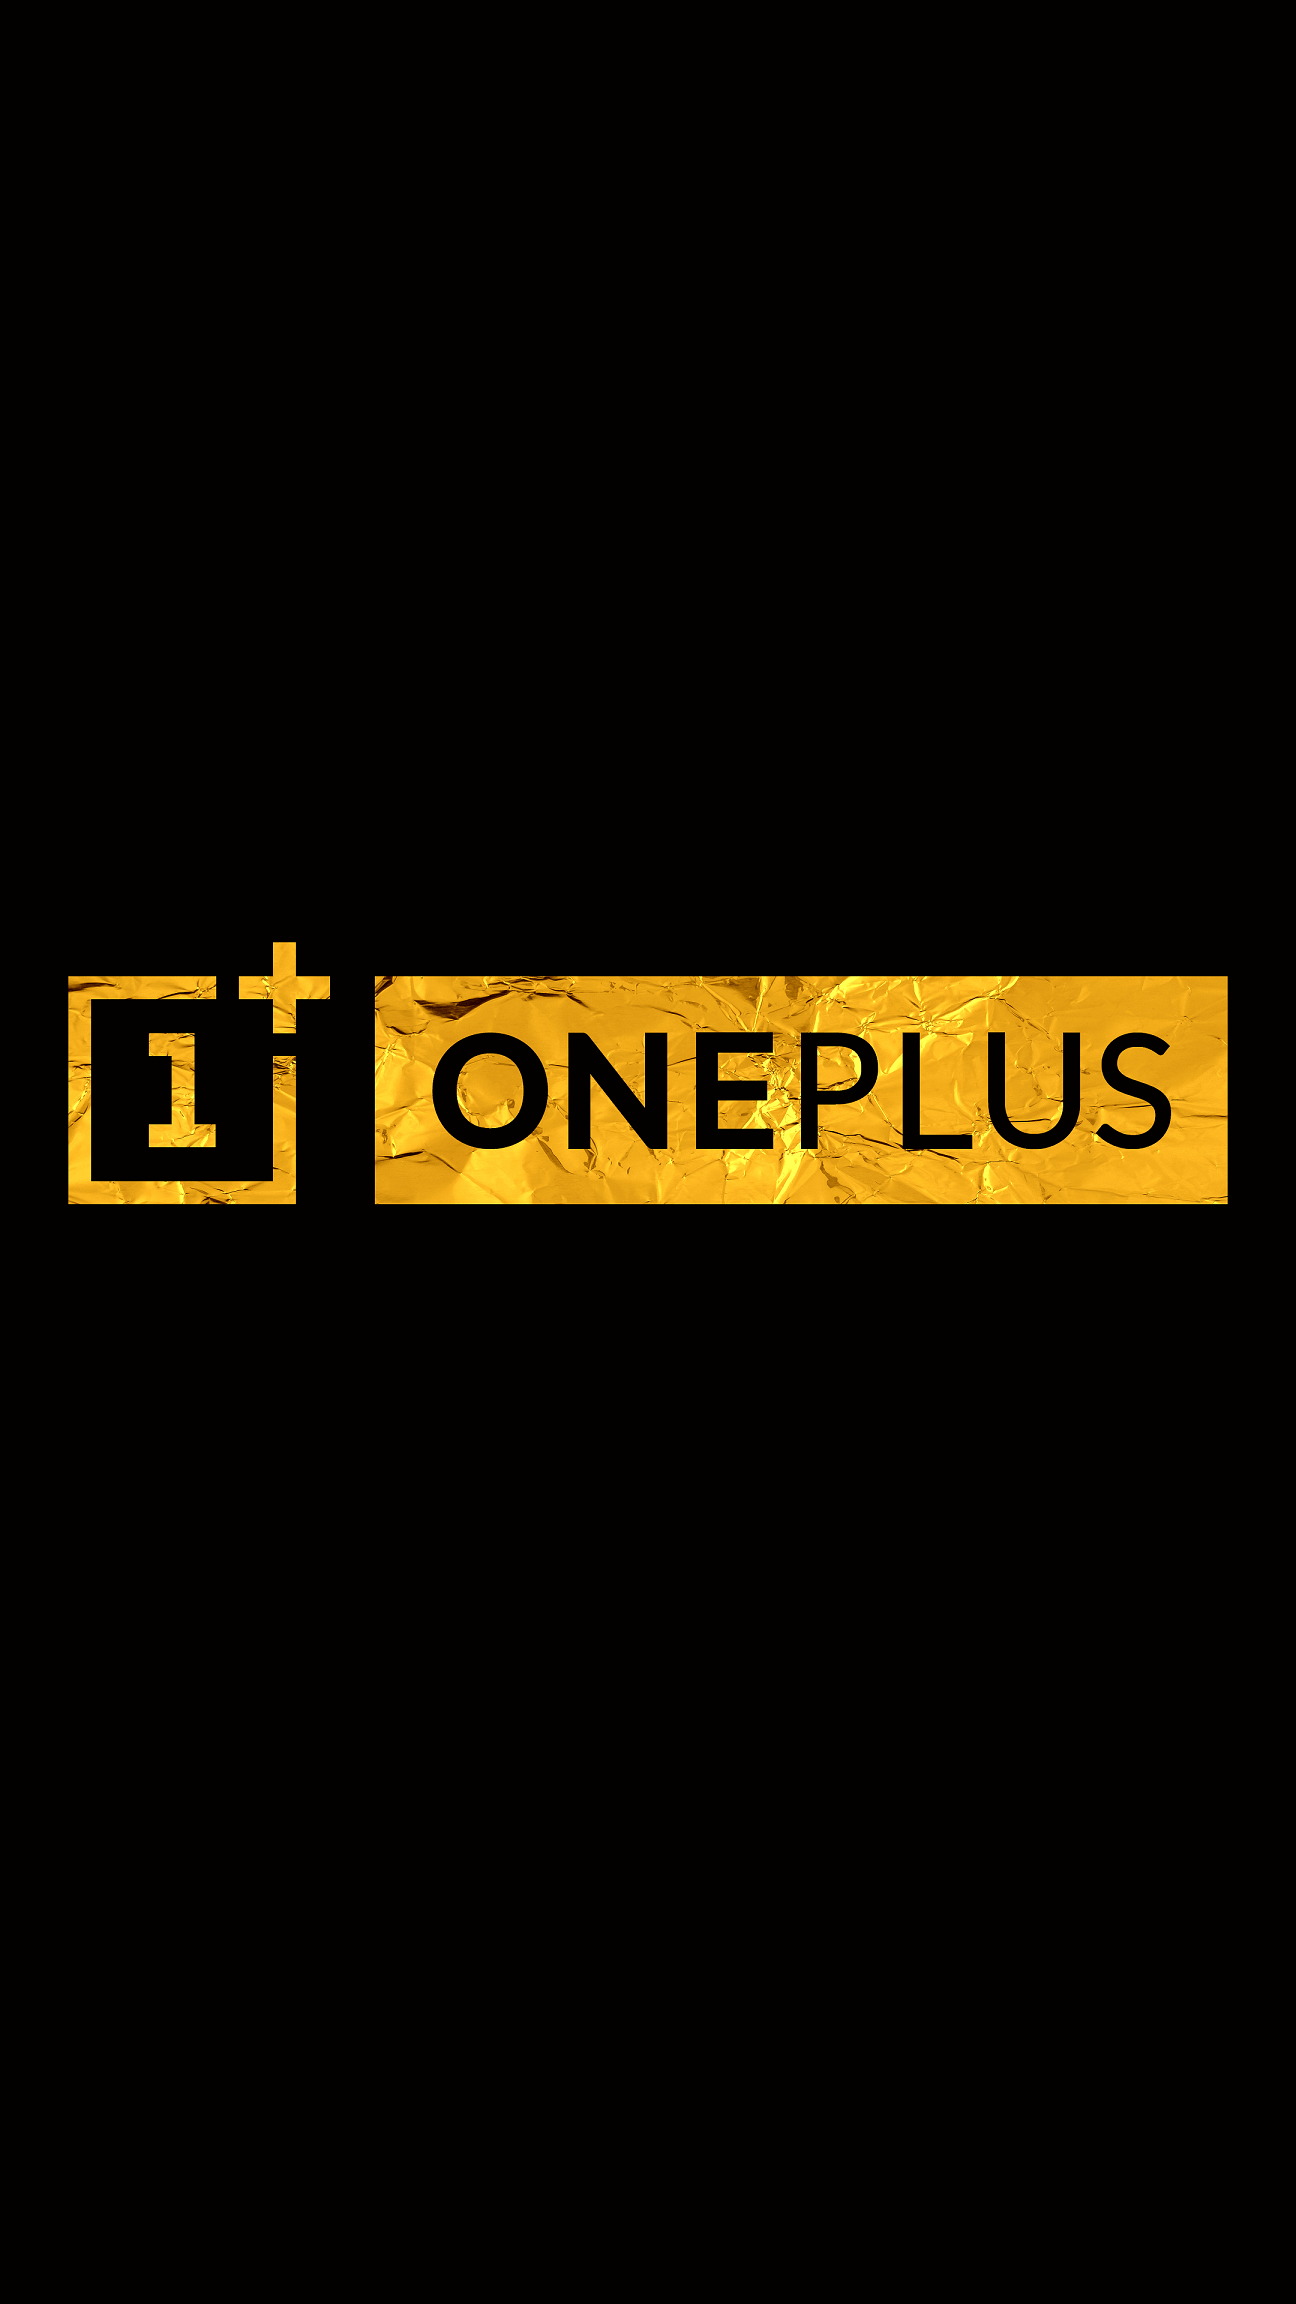 Picture proving Oneplus is wholly-owned sub-brand of OPPO - Gizmochina